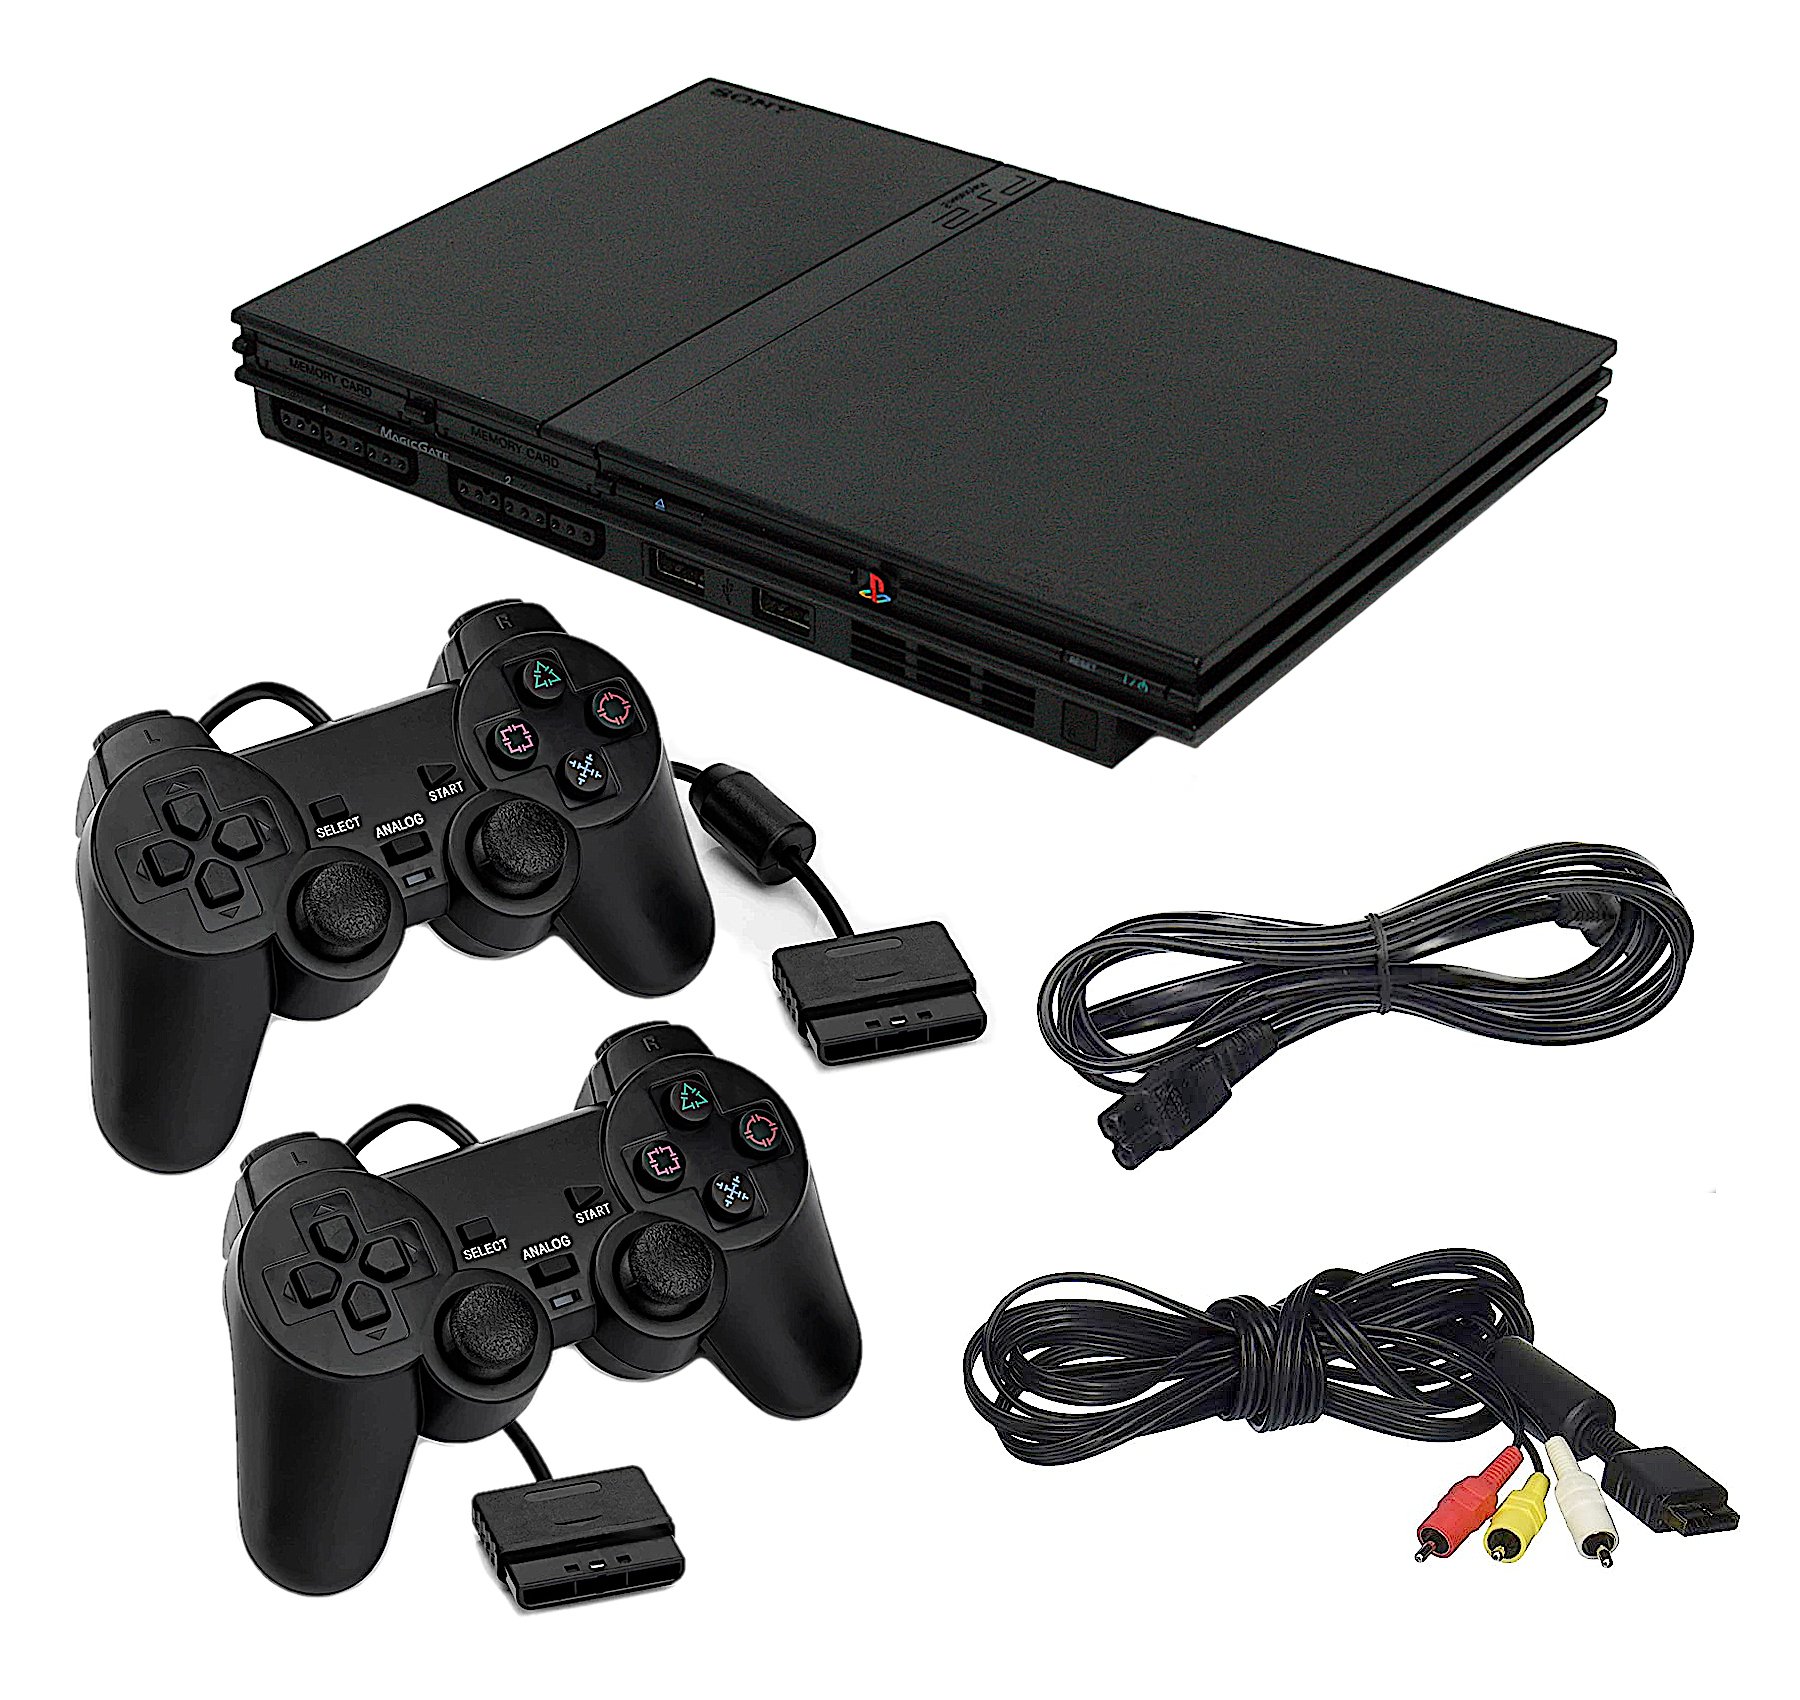 Sony PlayStation 2 PS2 Game Console Slim - Pick 1-2 Voomwa Wired Controllers + US Seller